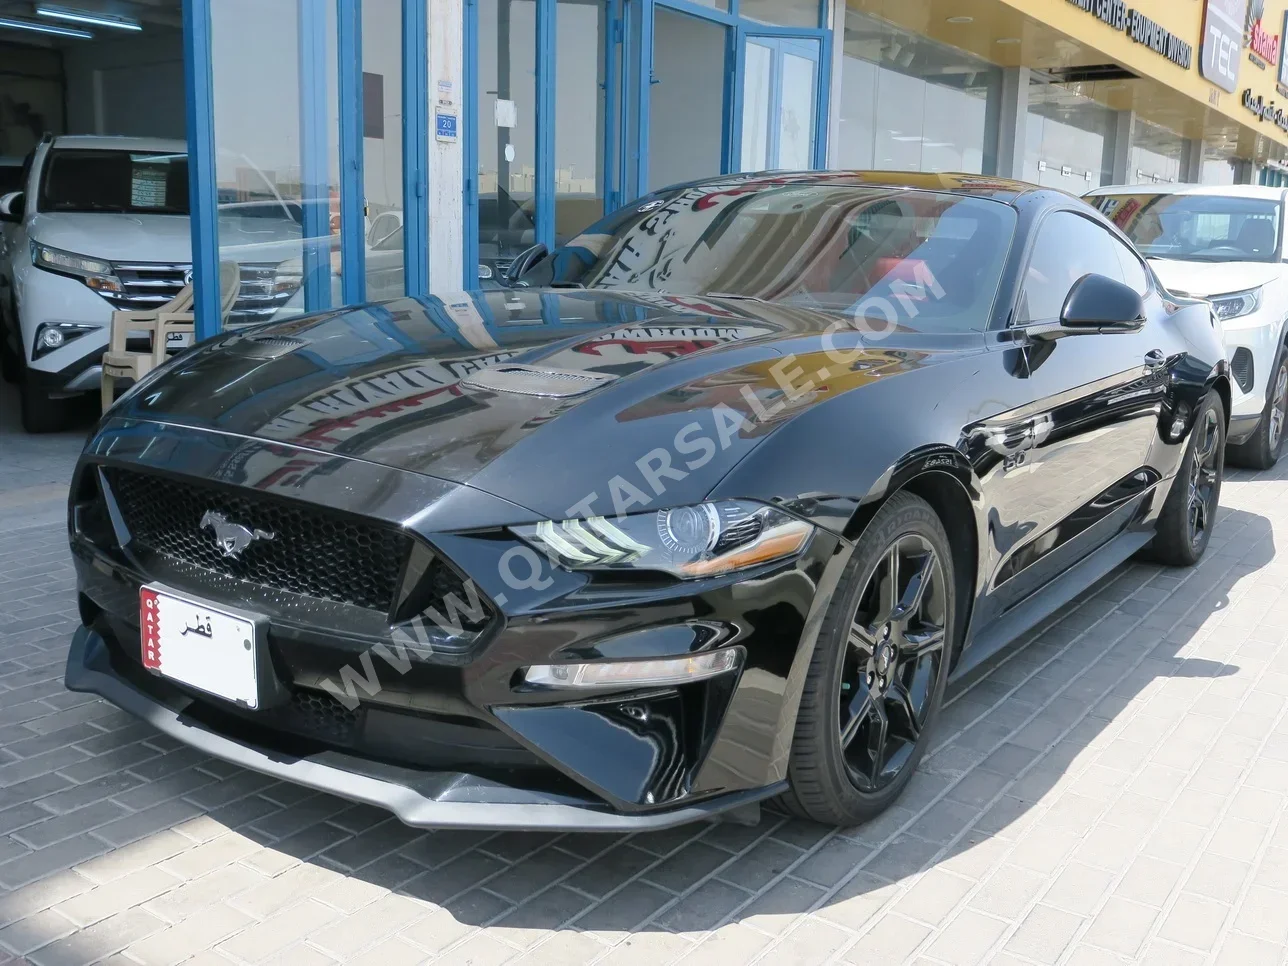 Ford  Mustang  GT  2020  Automatic  79,000 Km  8 Cylinder  Rear Wheel Drive (RWD)  Coupe / Sport  Black